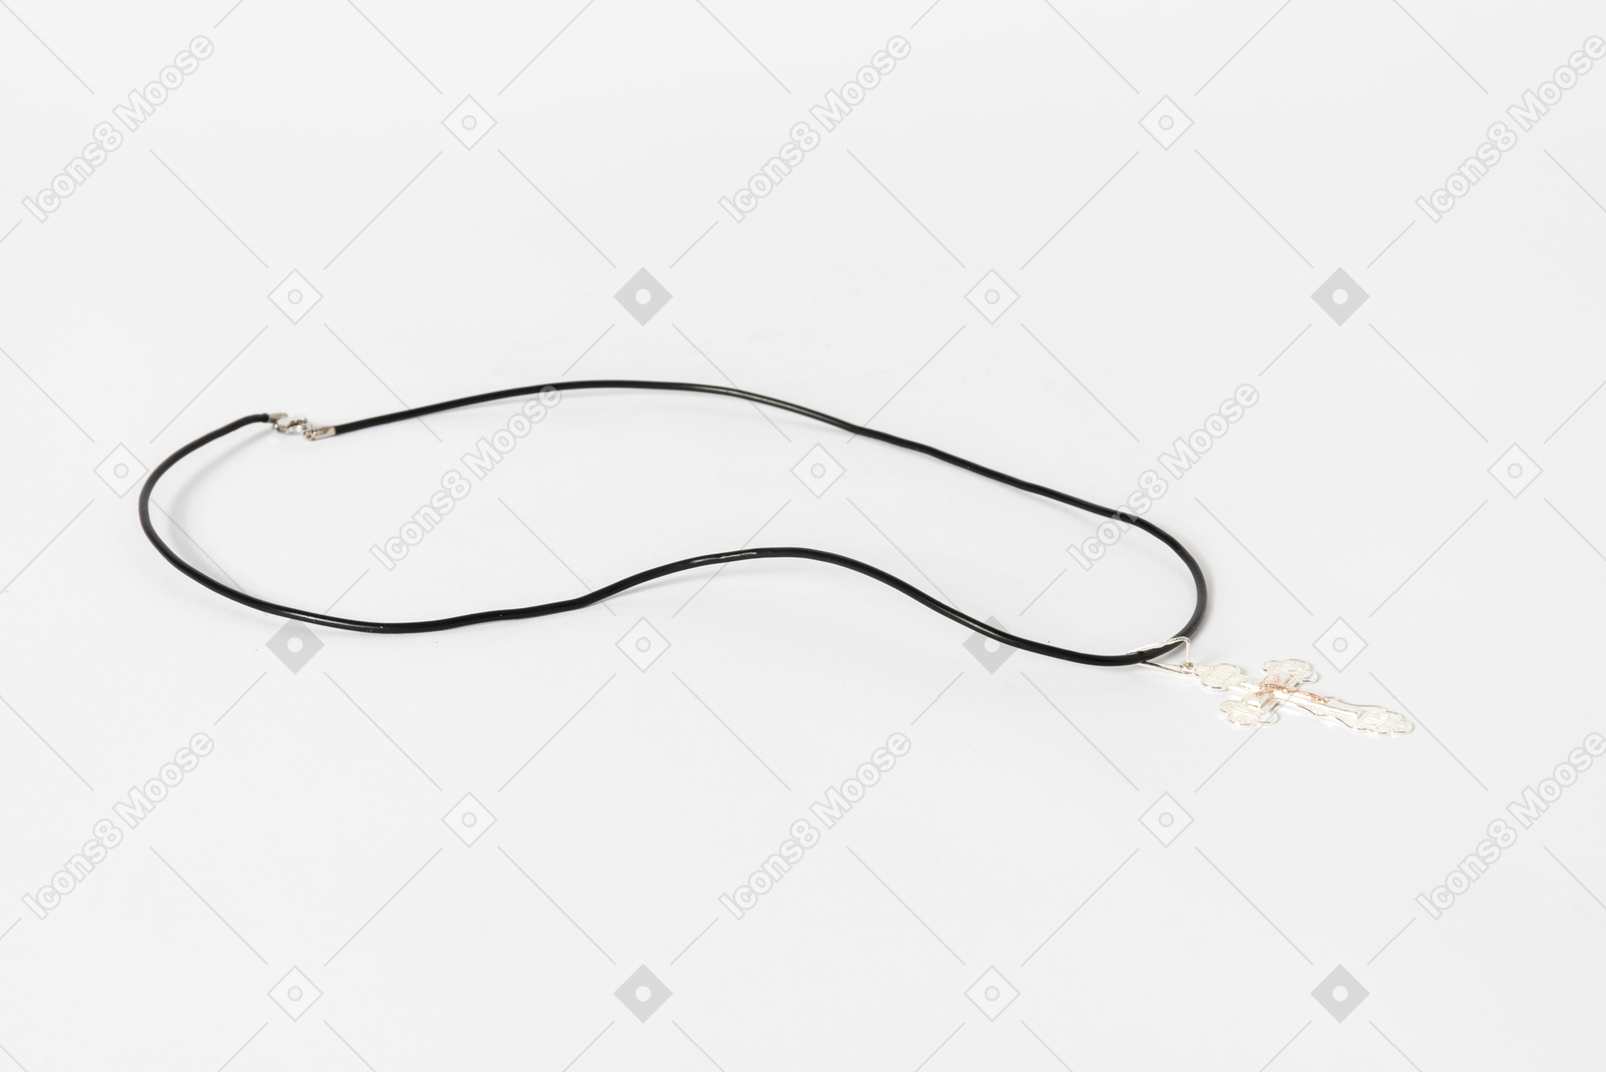 Cross necklace on white background